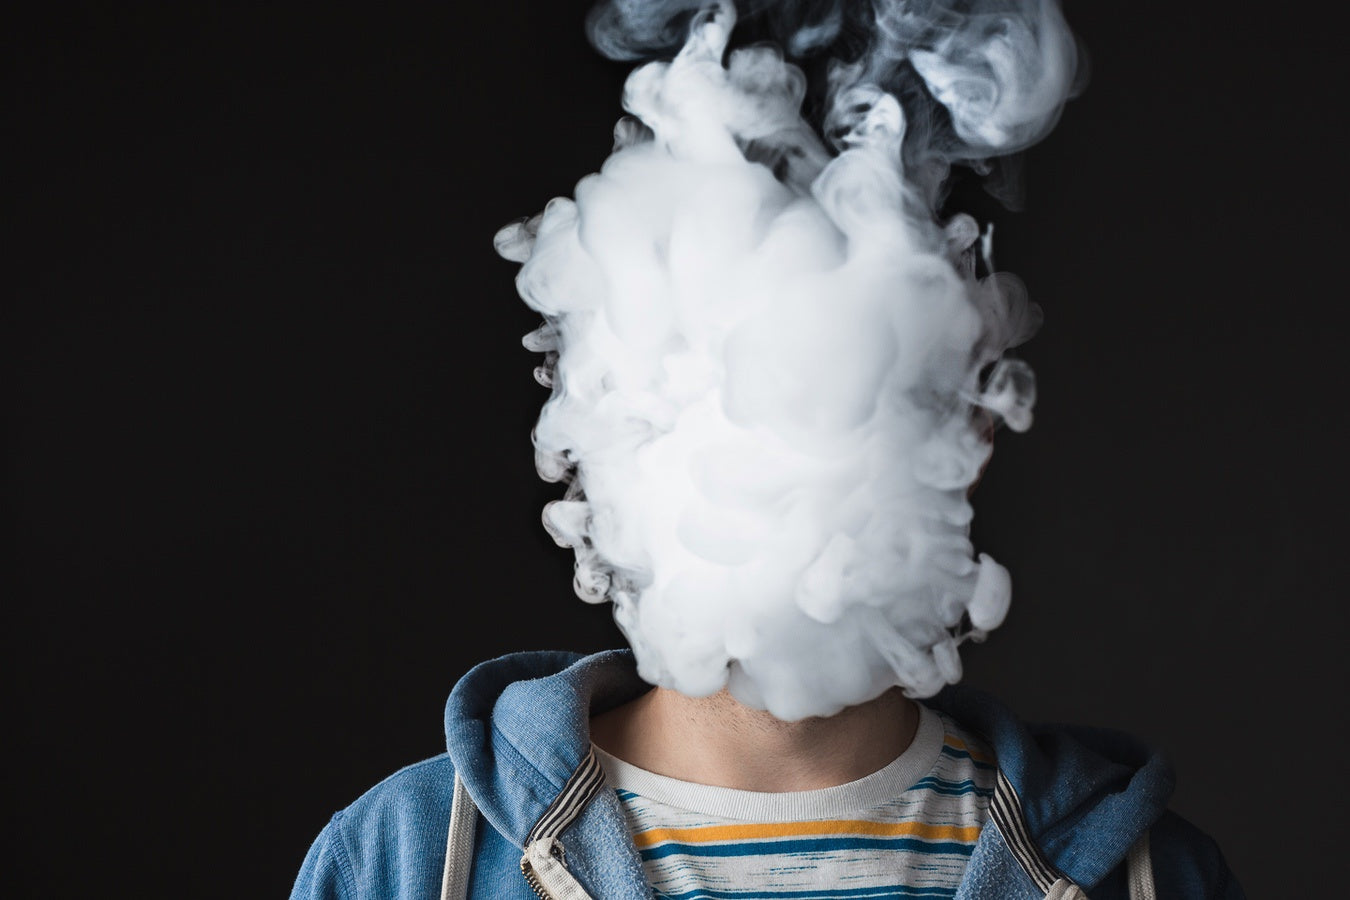 Man practicing inhalation technique for cloud chasing